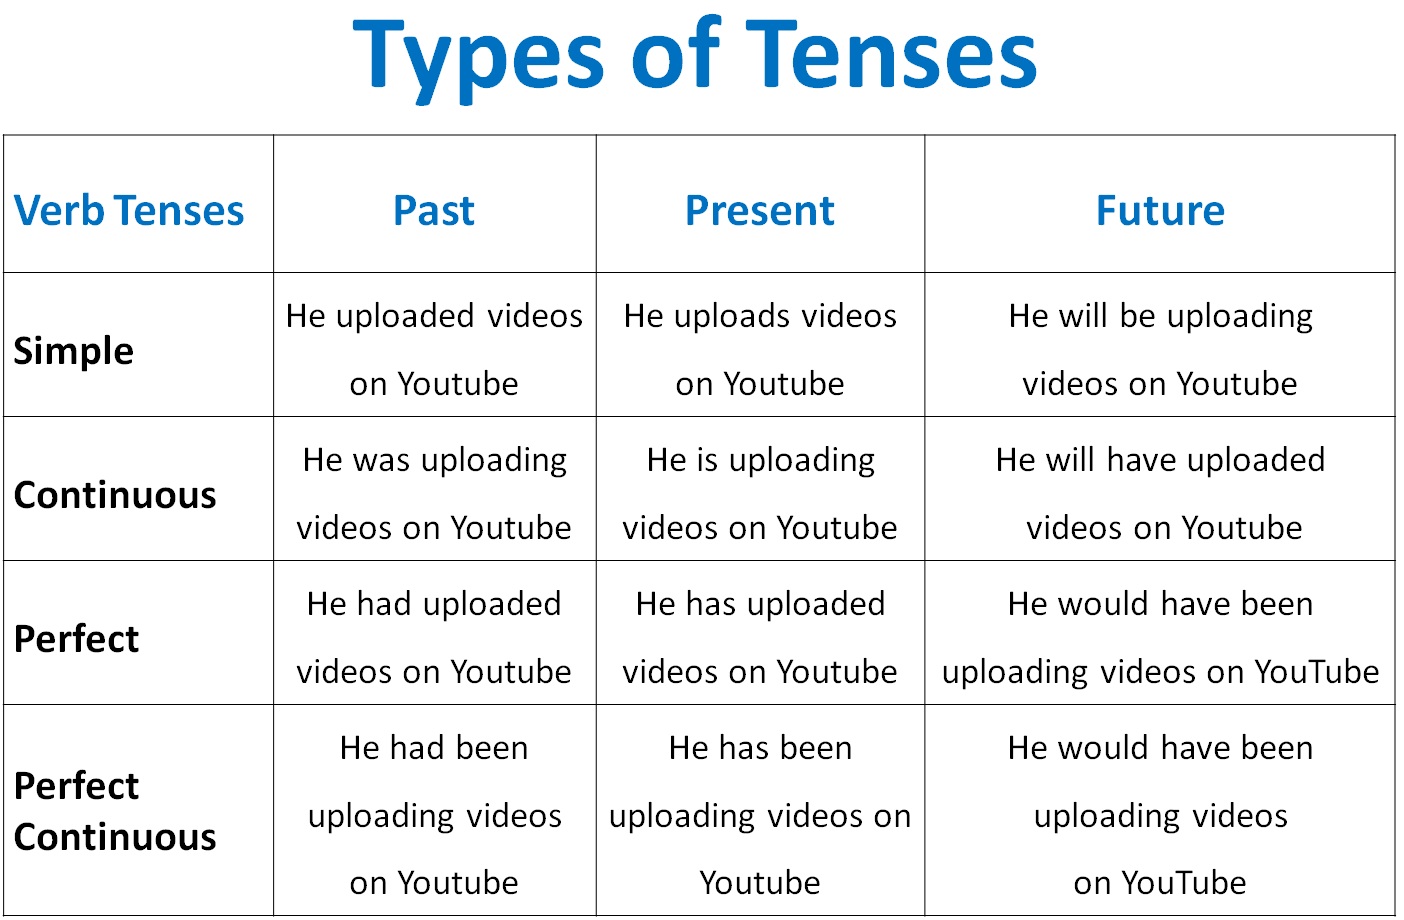 summary-of-different-tenses-verbs-and-tenses